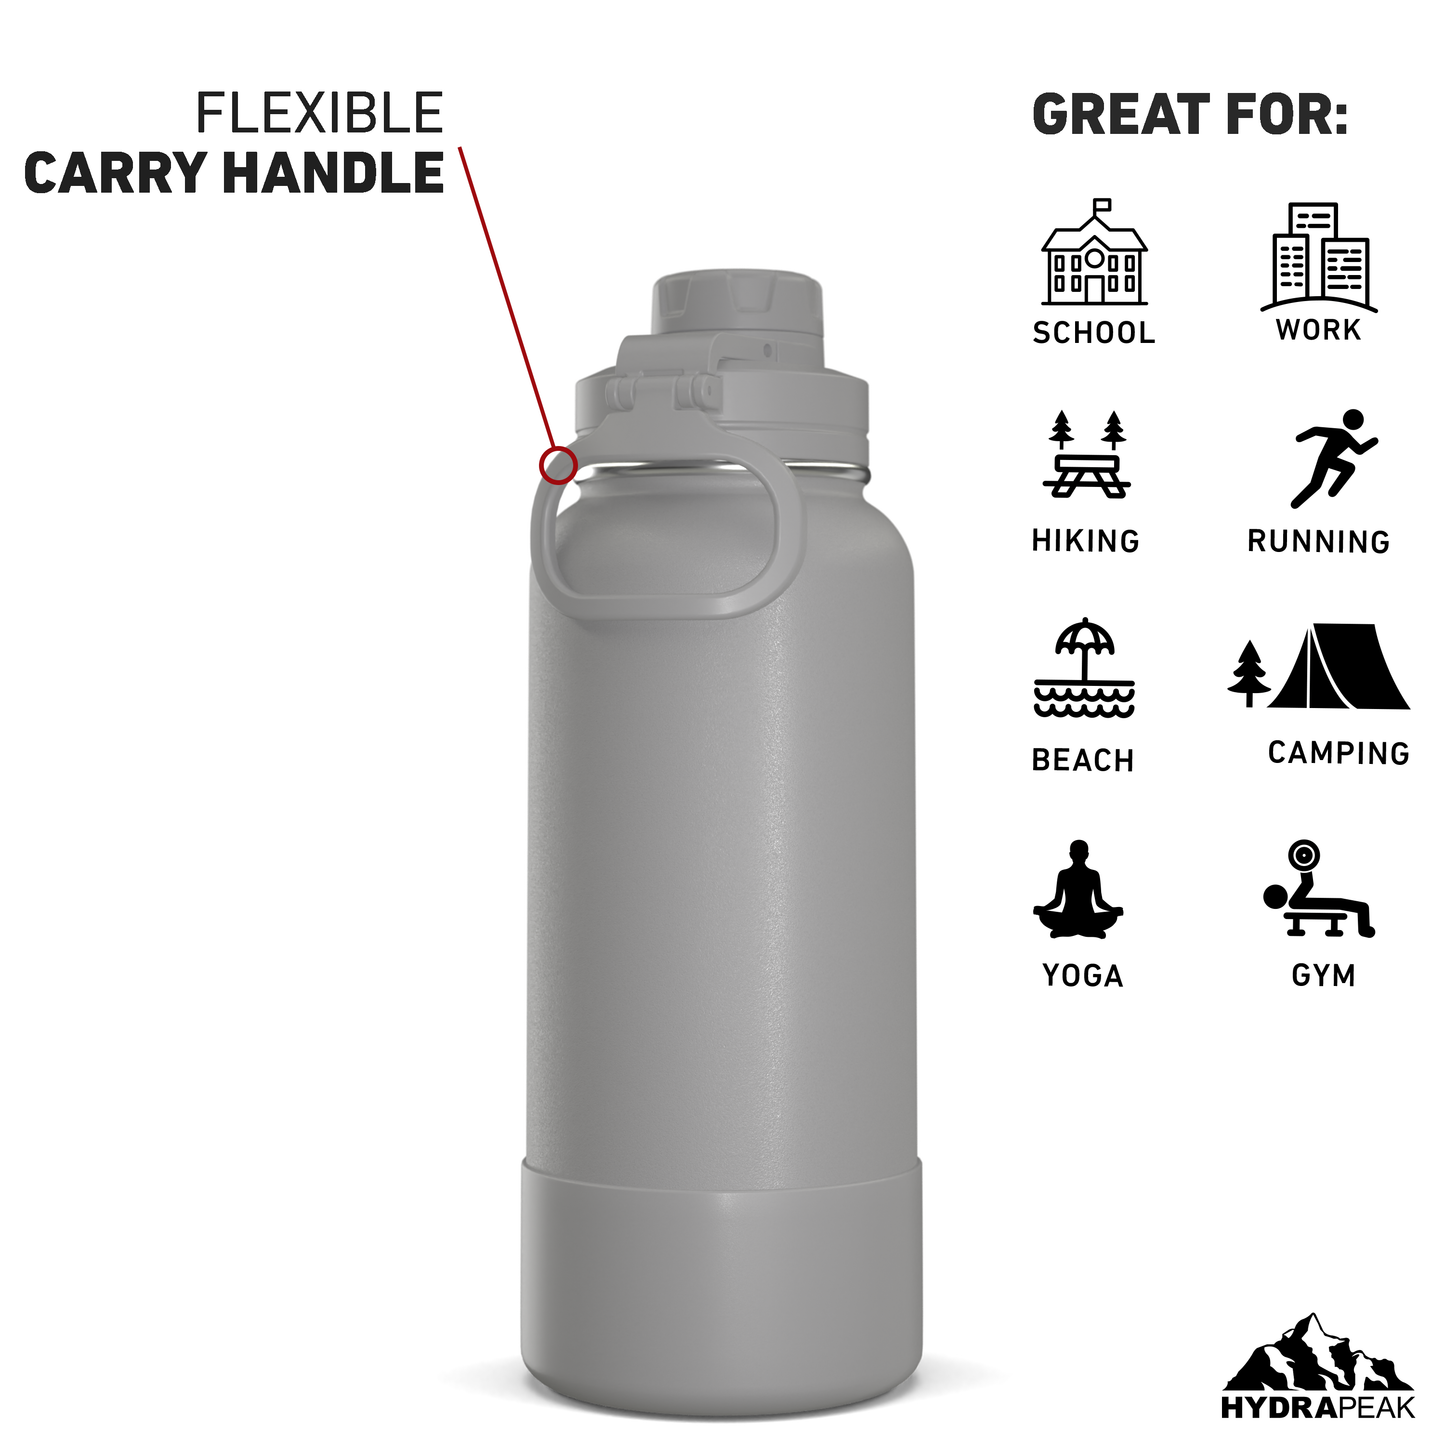 32oz Insulated Water Bottles with Matching Chug Lid and Rubber Boot- Grey